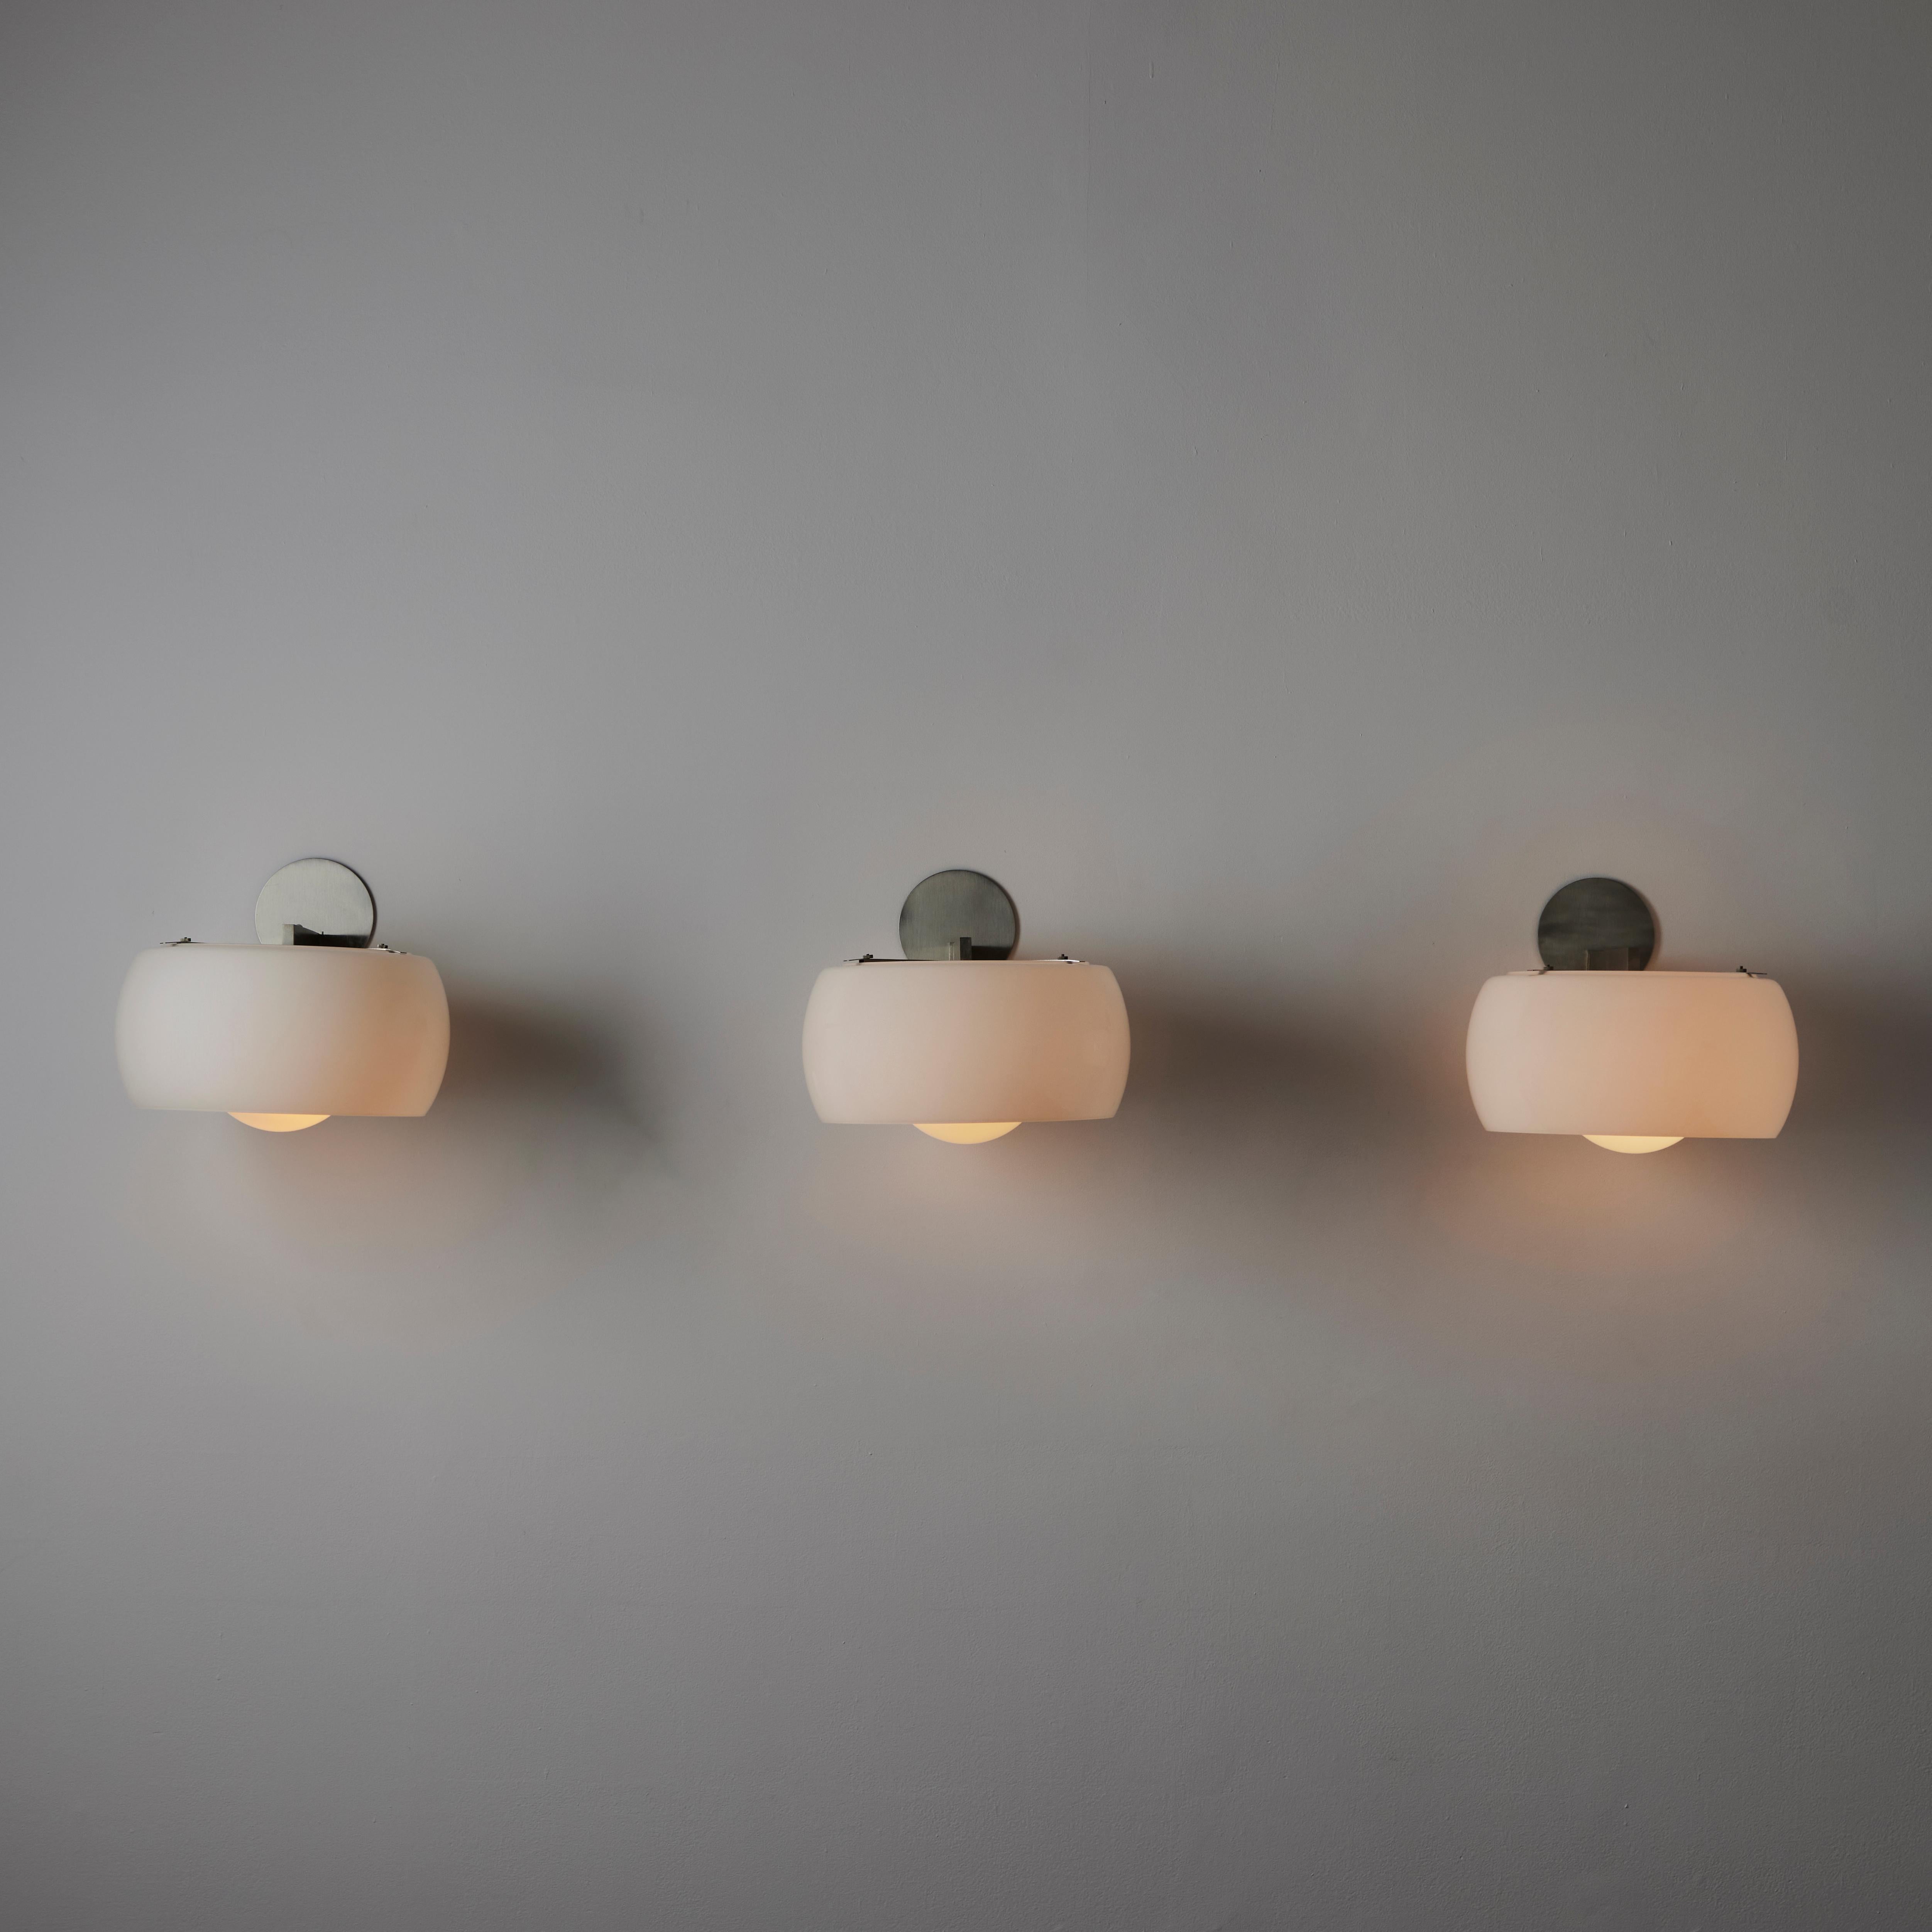 'Clinio' Wall Lights by Vico Magistretti for Artemide (IT, c.1961) Large opaline glass diffusers paired with brushed nickel armatures. Each light holds one E27 socket type, adapted for the US. We recommend a single 40w bulb. Rewired for the US.